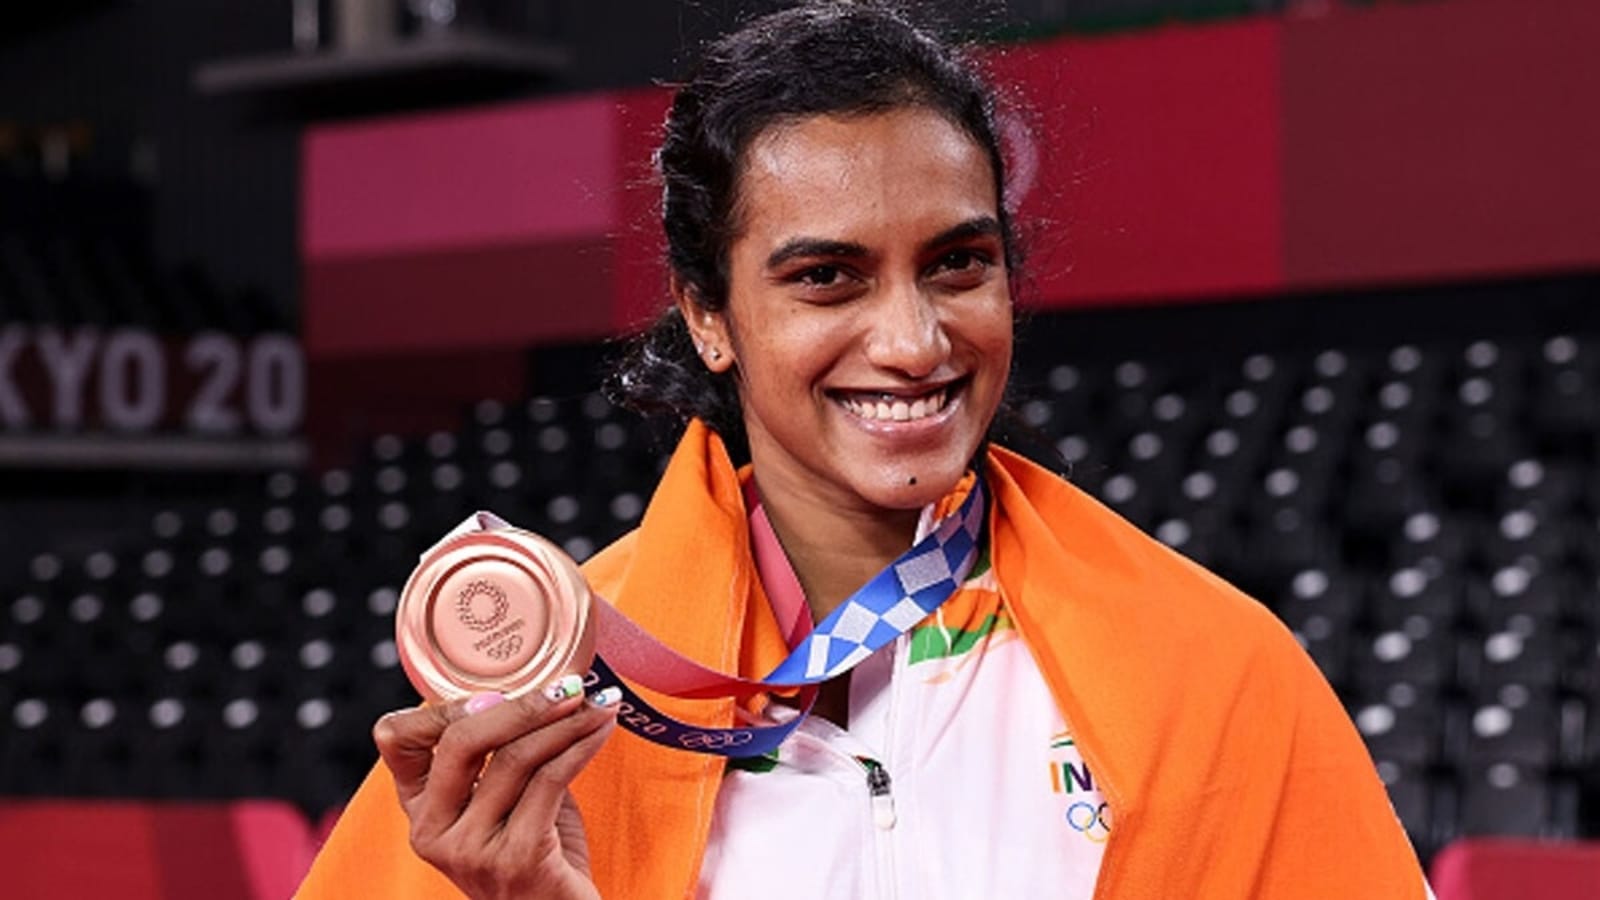 PV Sindhu wins bronze medal to create history for India at Tokyo